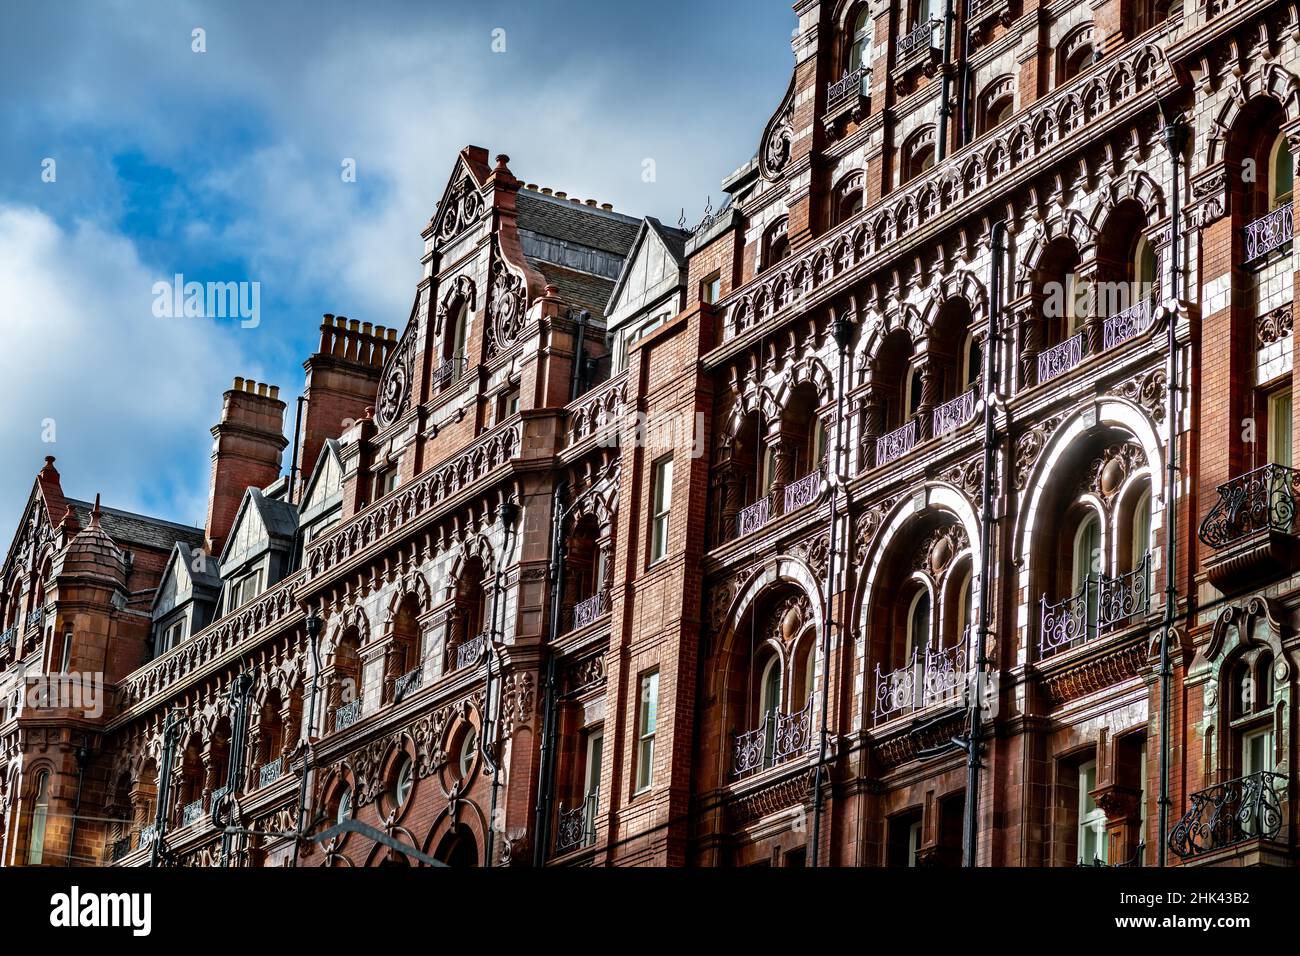 The Midland Hotel, Manchester. Stock Photo